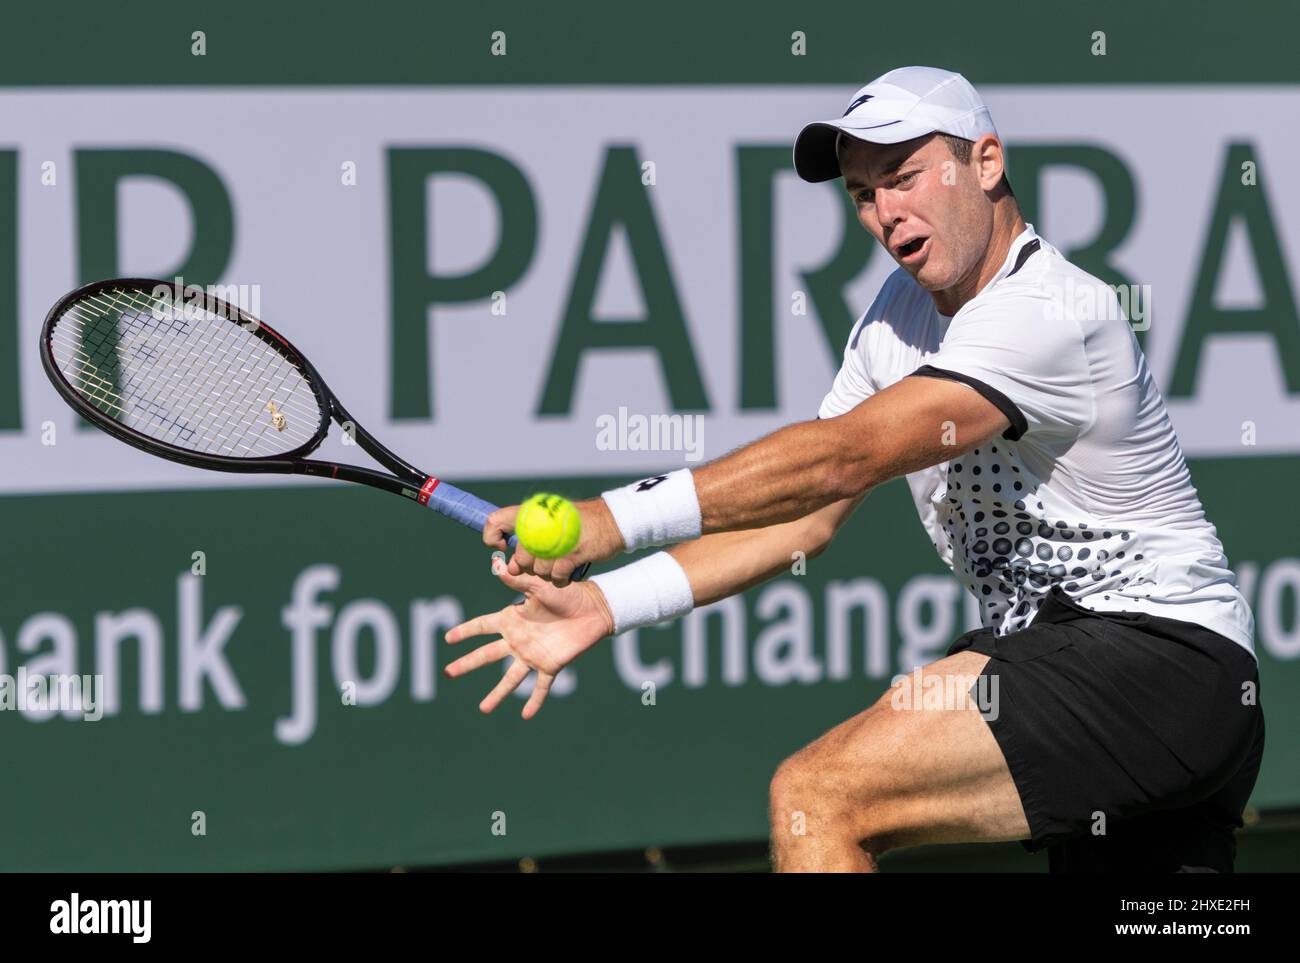 Indian Wells, USA. 11th Mar, 2022. Tennis; ATP Tour; Indian Wells; BNP  Paribas Open; Men; Singles, 1st round, Paire (France) - Koepfer (Germany):  Dominik Koepfer during the match. Credit: Maximilian Haupt/dpa/Alamy Live